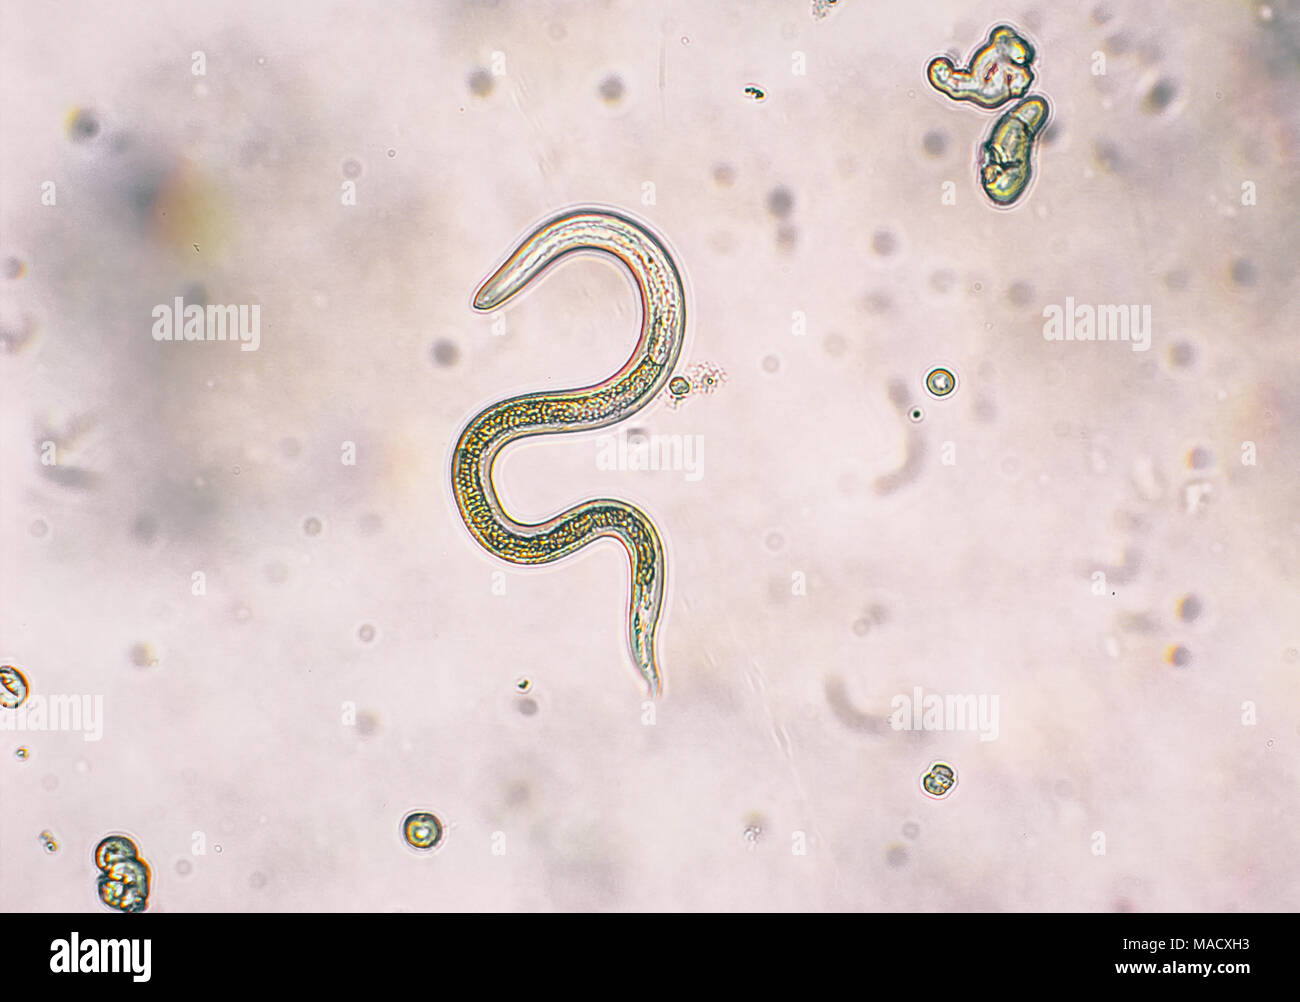 Toxocara canis second stage larvae hatch from eggs in microscope. Toxocariasis, also known as Roundworm Infection, causes disease in humans Stock Photo